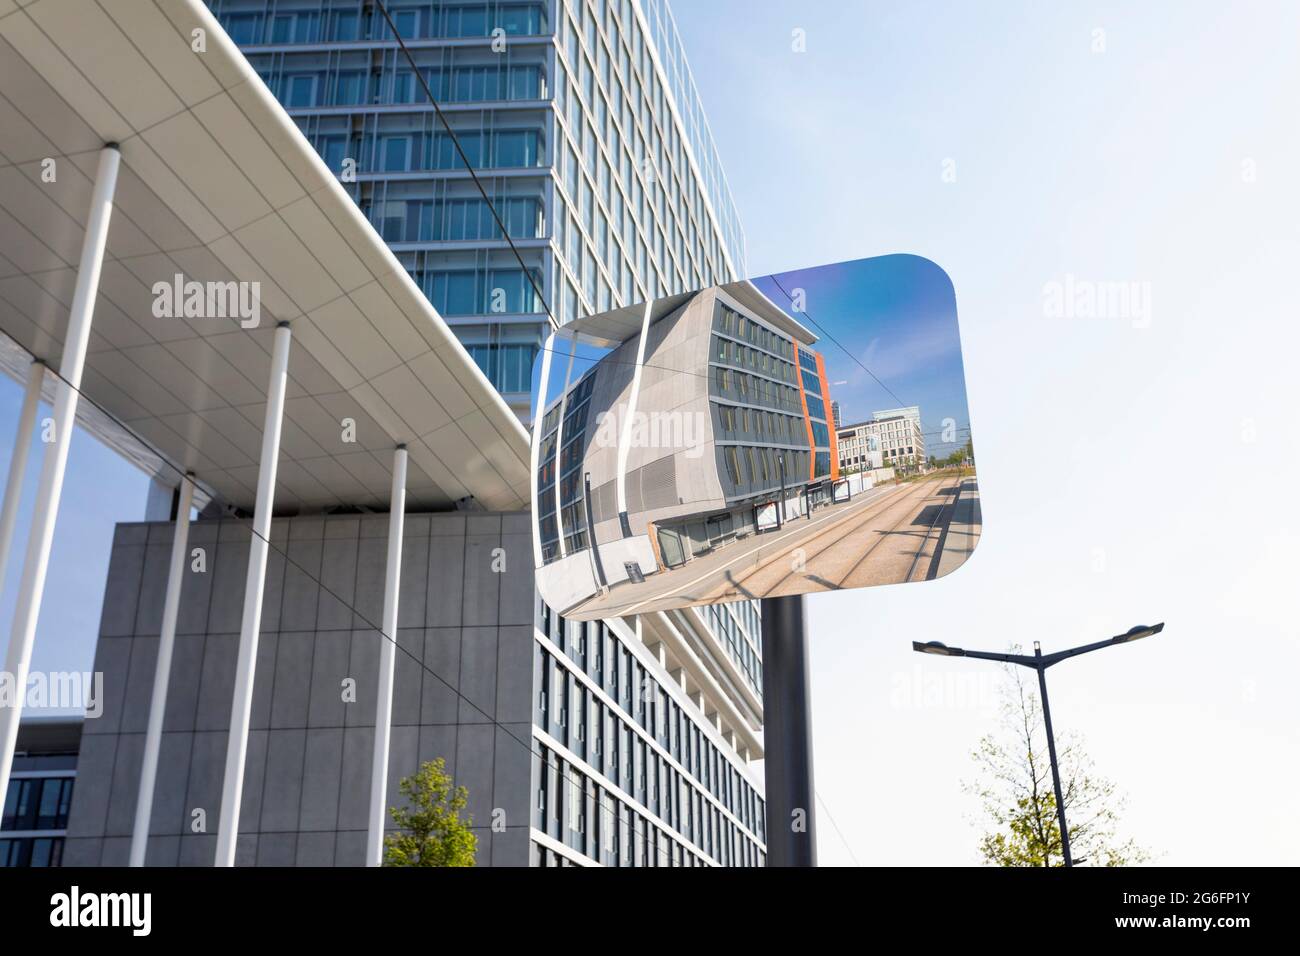 Europe, Luxembourg, Luxembourg City, Kirchberg, Europaparlament Building (Parlement Européen) reflected in Tram Stop Mirror. Stock Photo